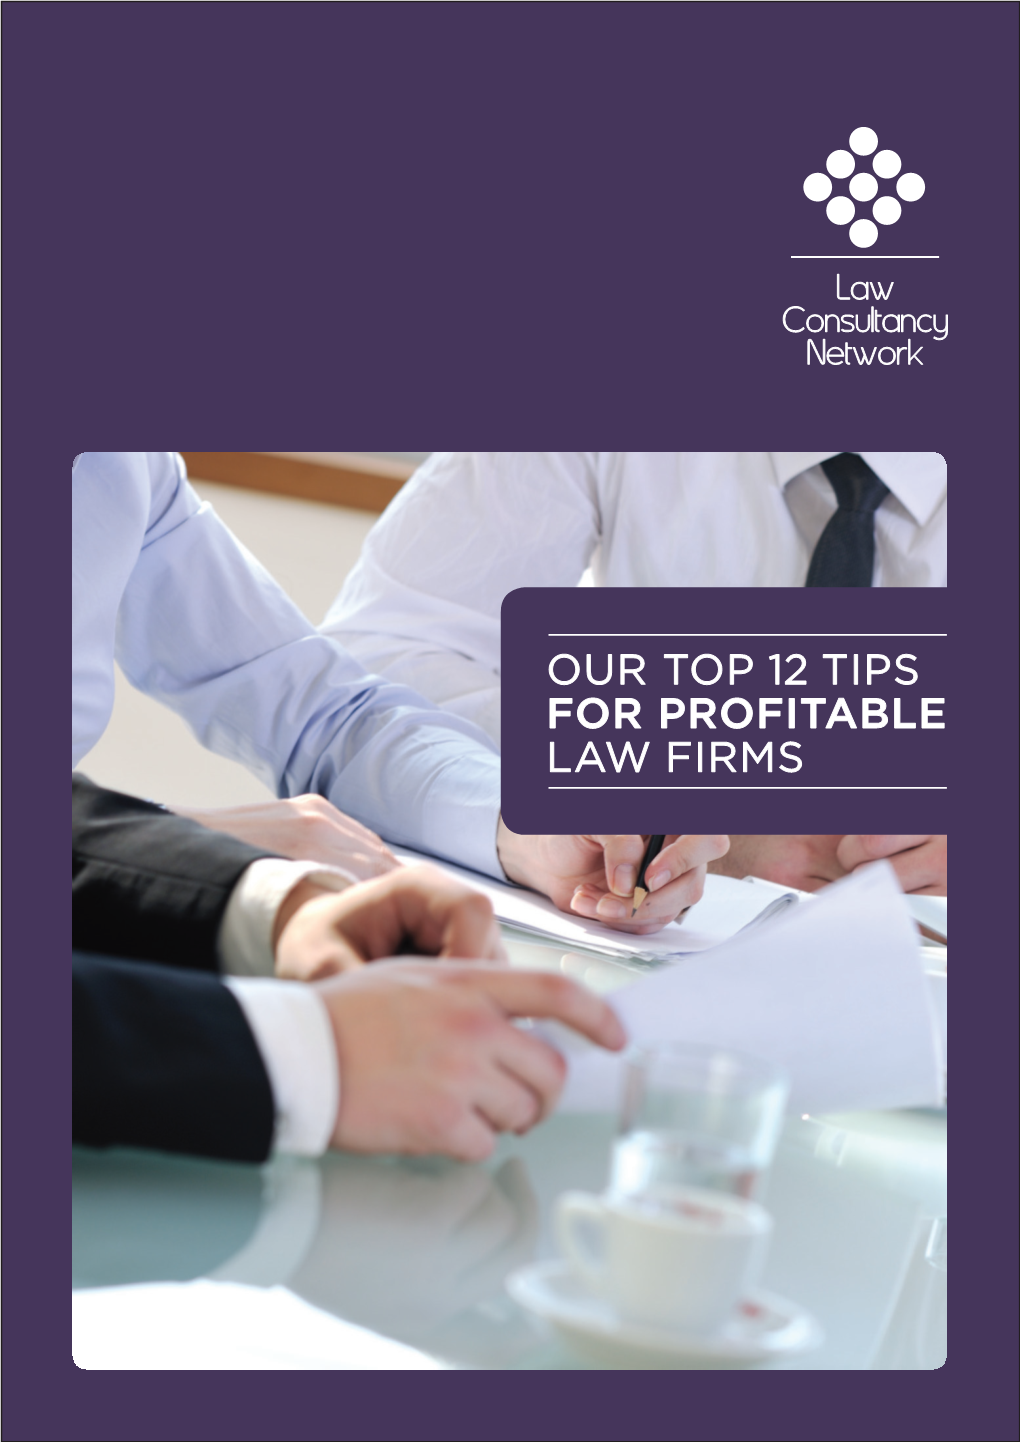 Our Top 12 Tips for Profitable Law Firms OUR Top 12 Tips for Profitable Law Firms